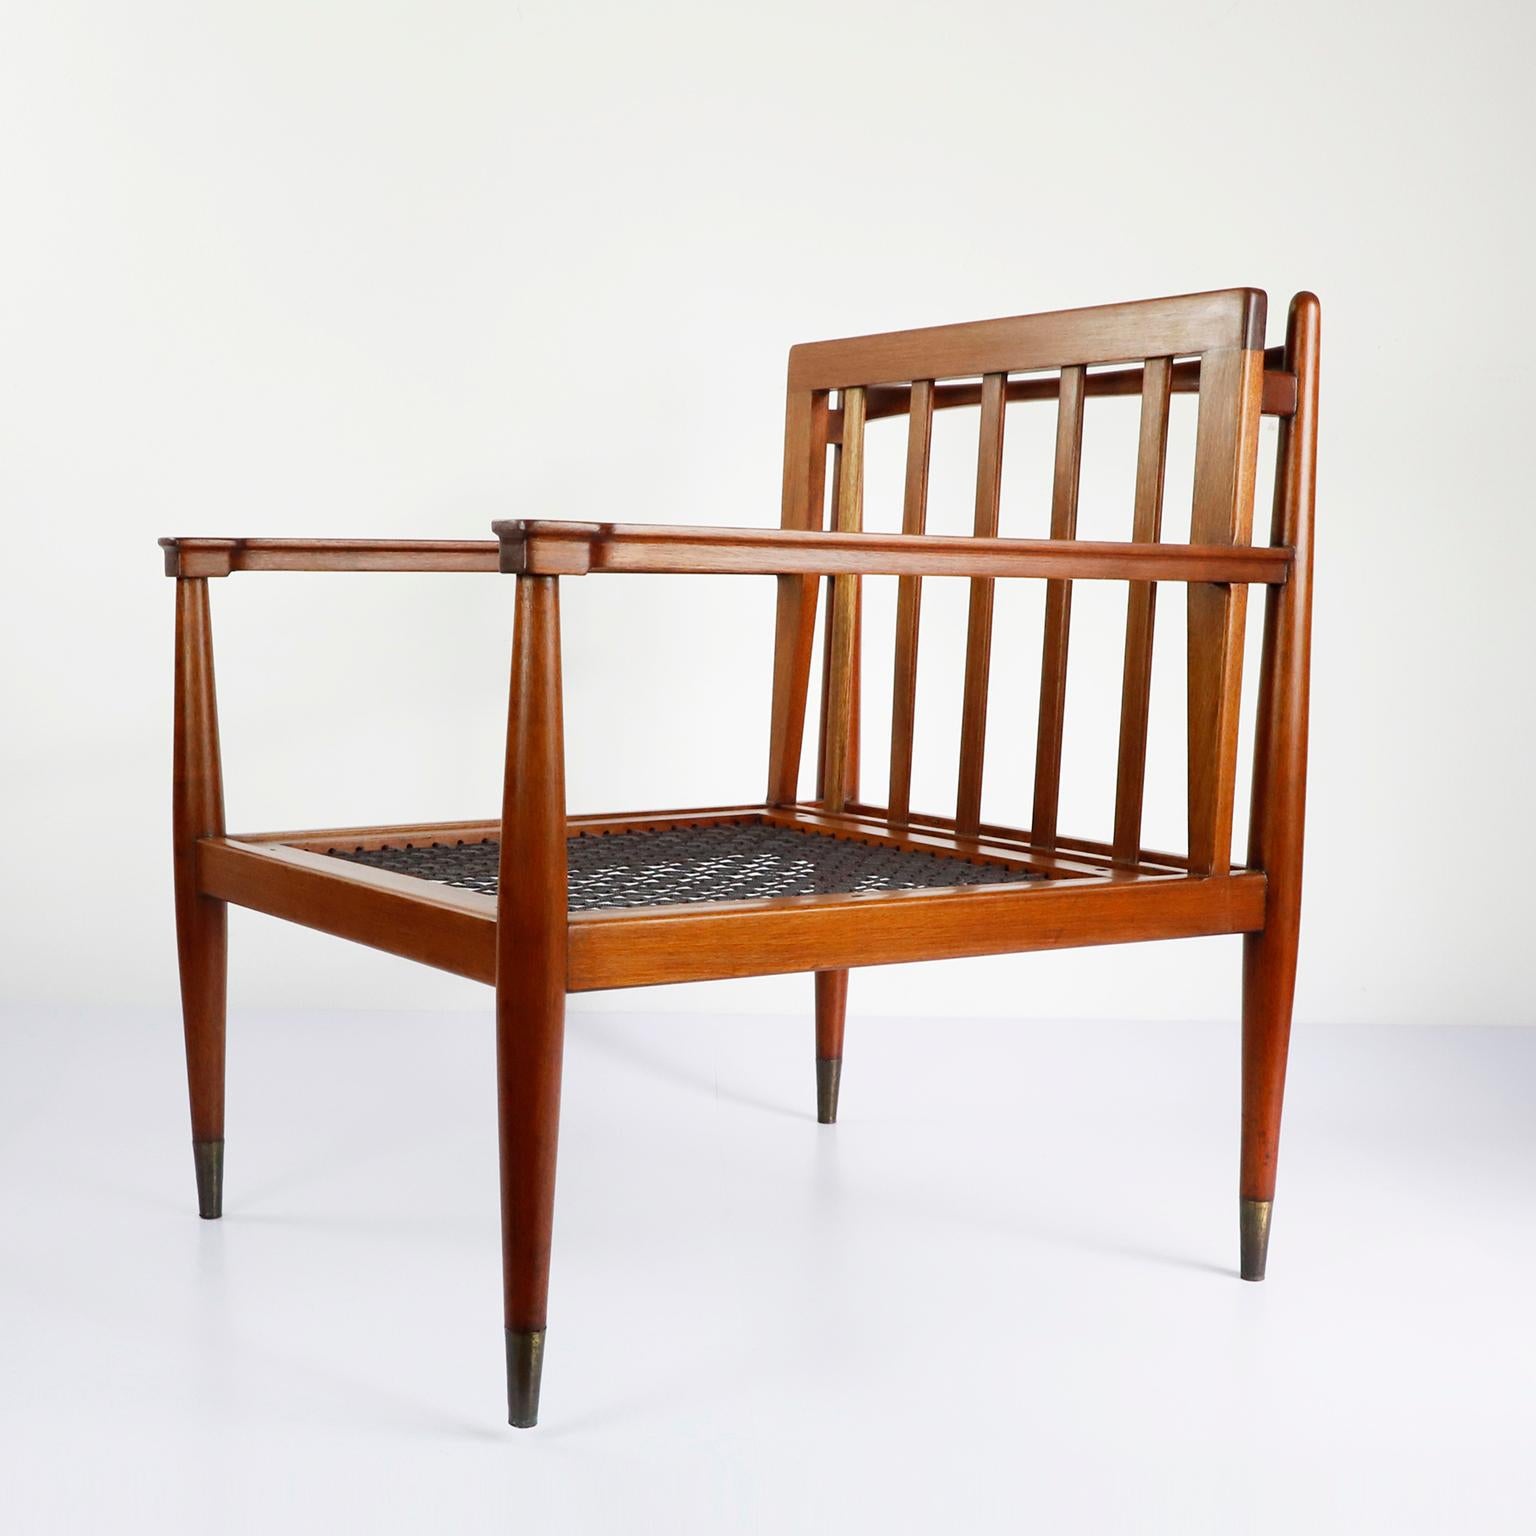 A rare set of two armchairs attributed to Charles Allen for Regil de Yucatan in 1952 in fantastic mahogany wood and brass details.


Charles W. Allen.

Charles W. Allen was an american interior designer who worked for Regil de Yucatán, a